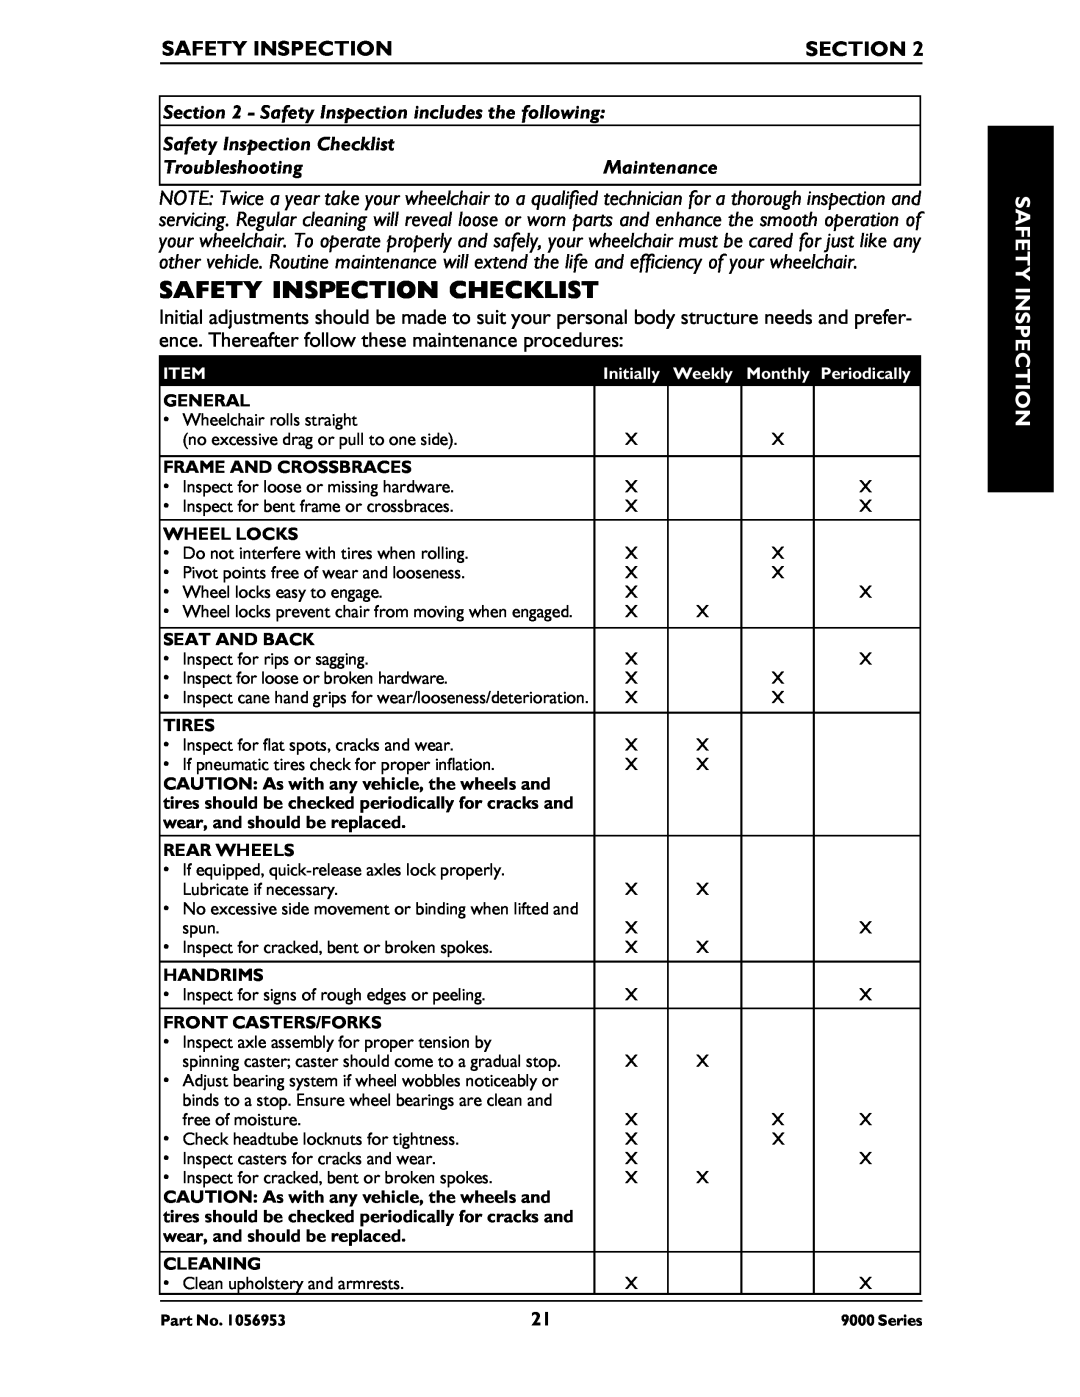 Invacare 9000XT Recliner Safety Inspection Checklist, Section, Safety Inspection includes the following, Troubleshooting 